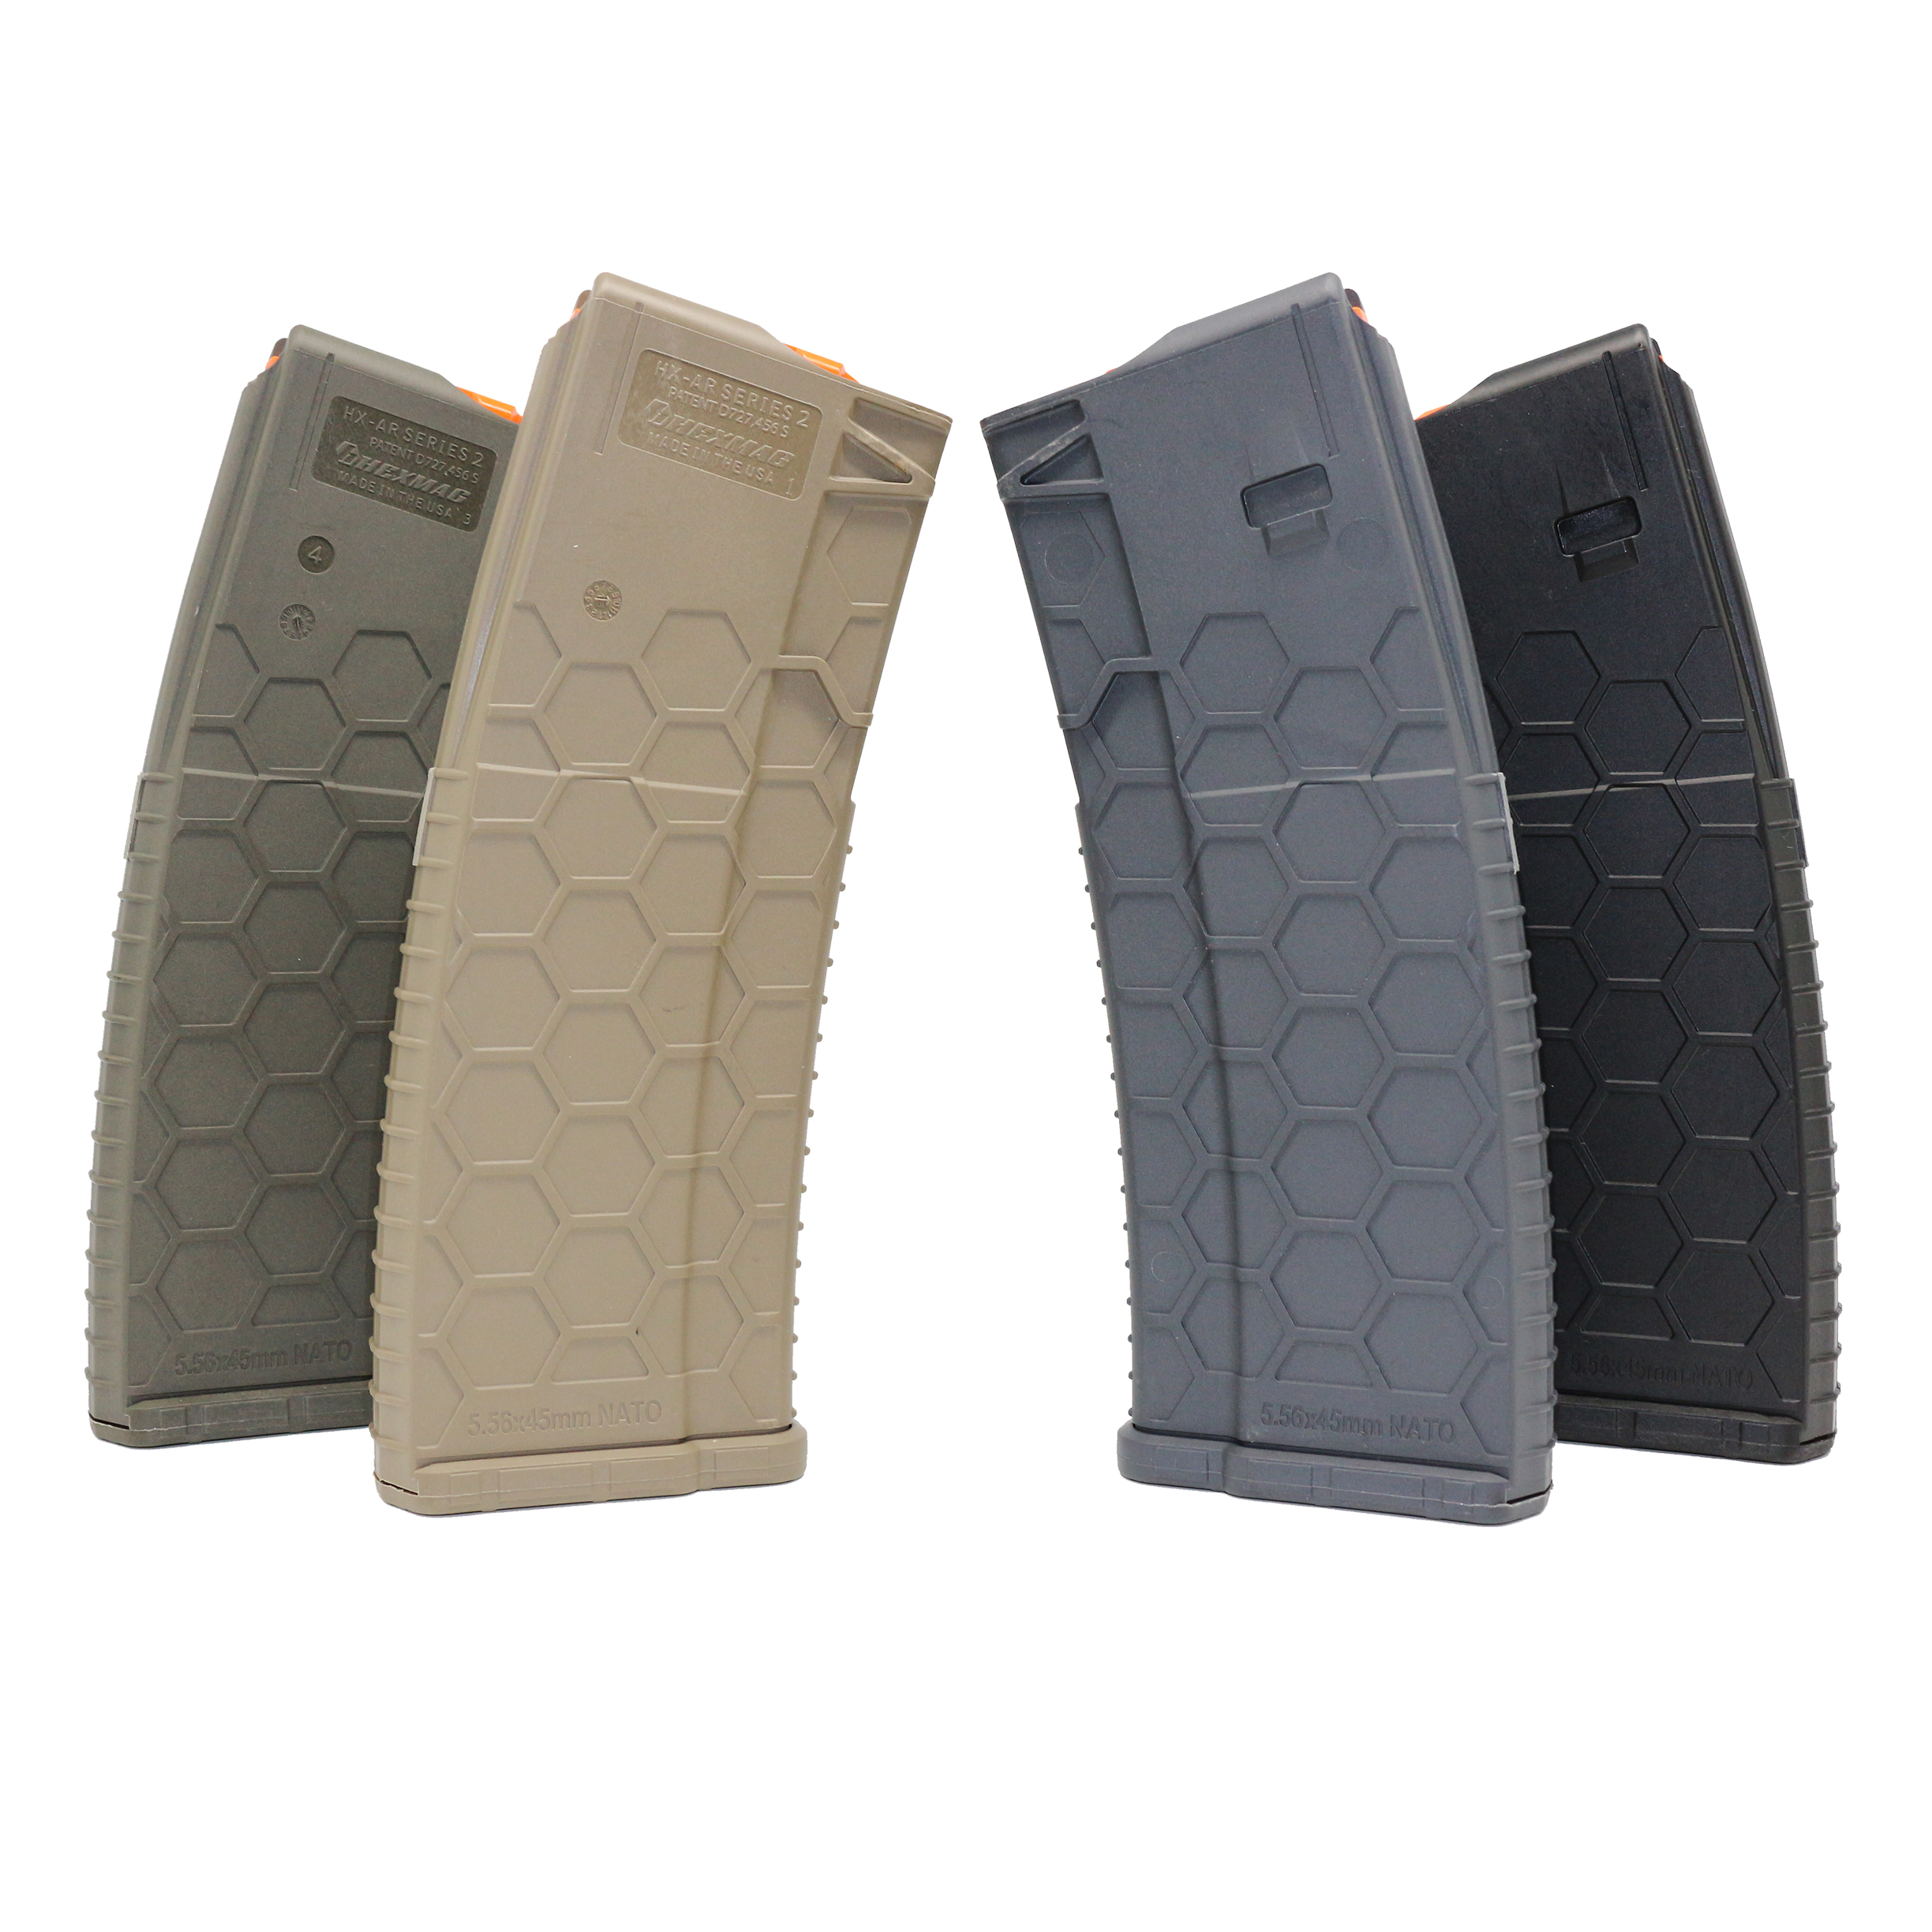 Features: 10-Round Magazine in A 30-Round Body Patented Polyhex2